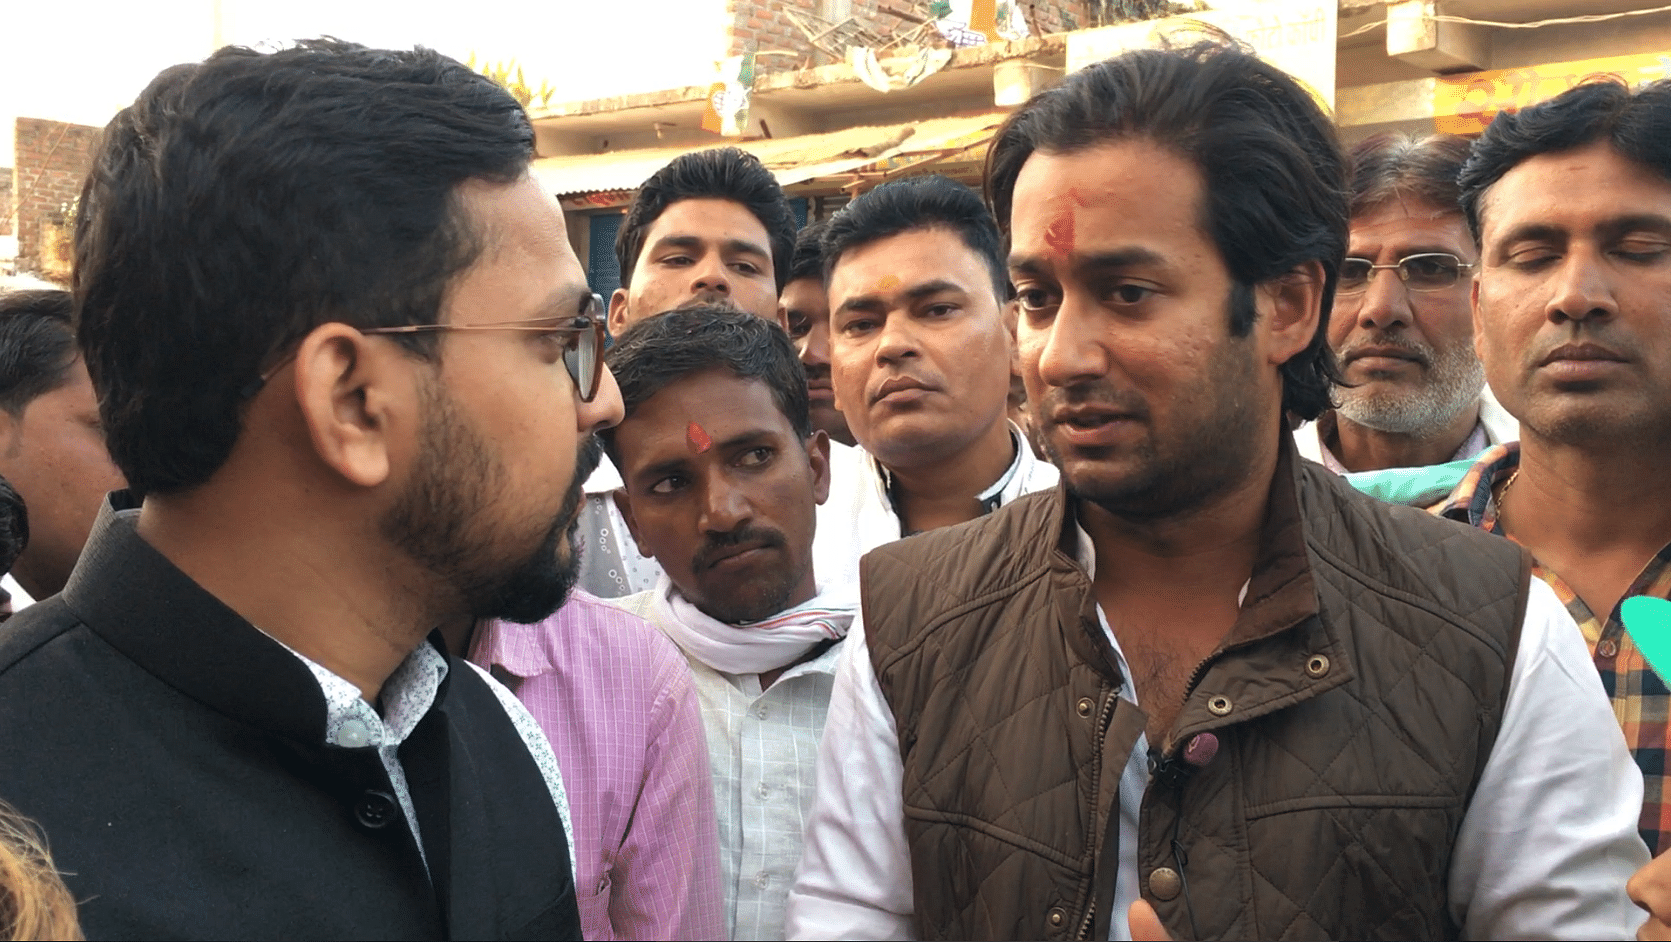 Digvijay Singh’s son Jaivardhan Singh speaks with The Quint ahead of Madhya Pradesh Assembly elections.